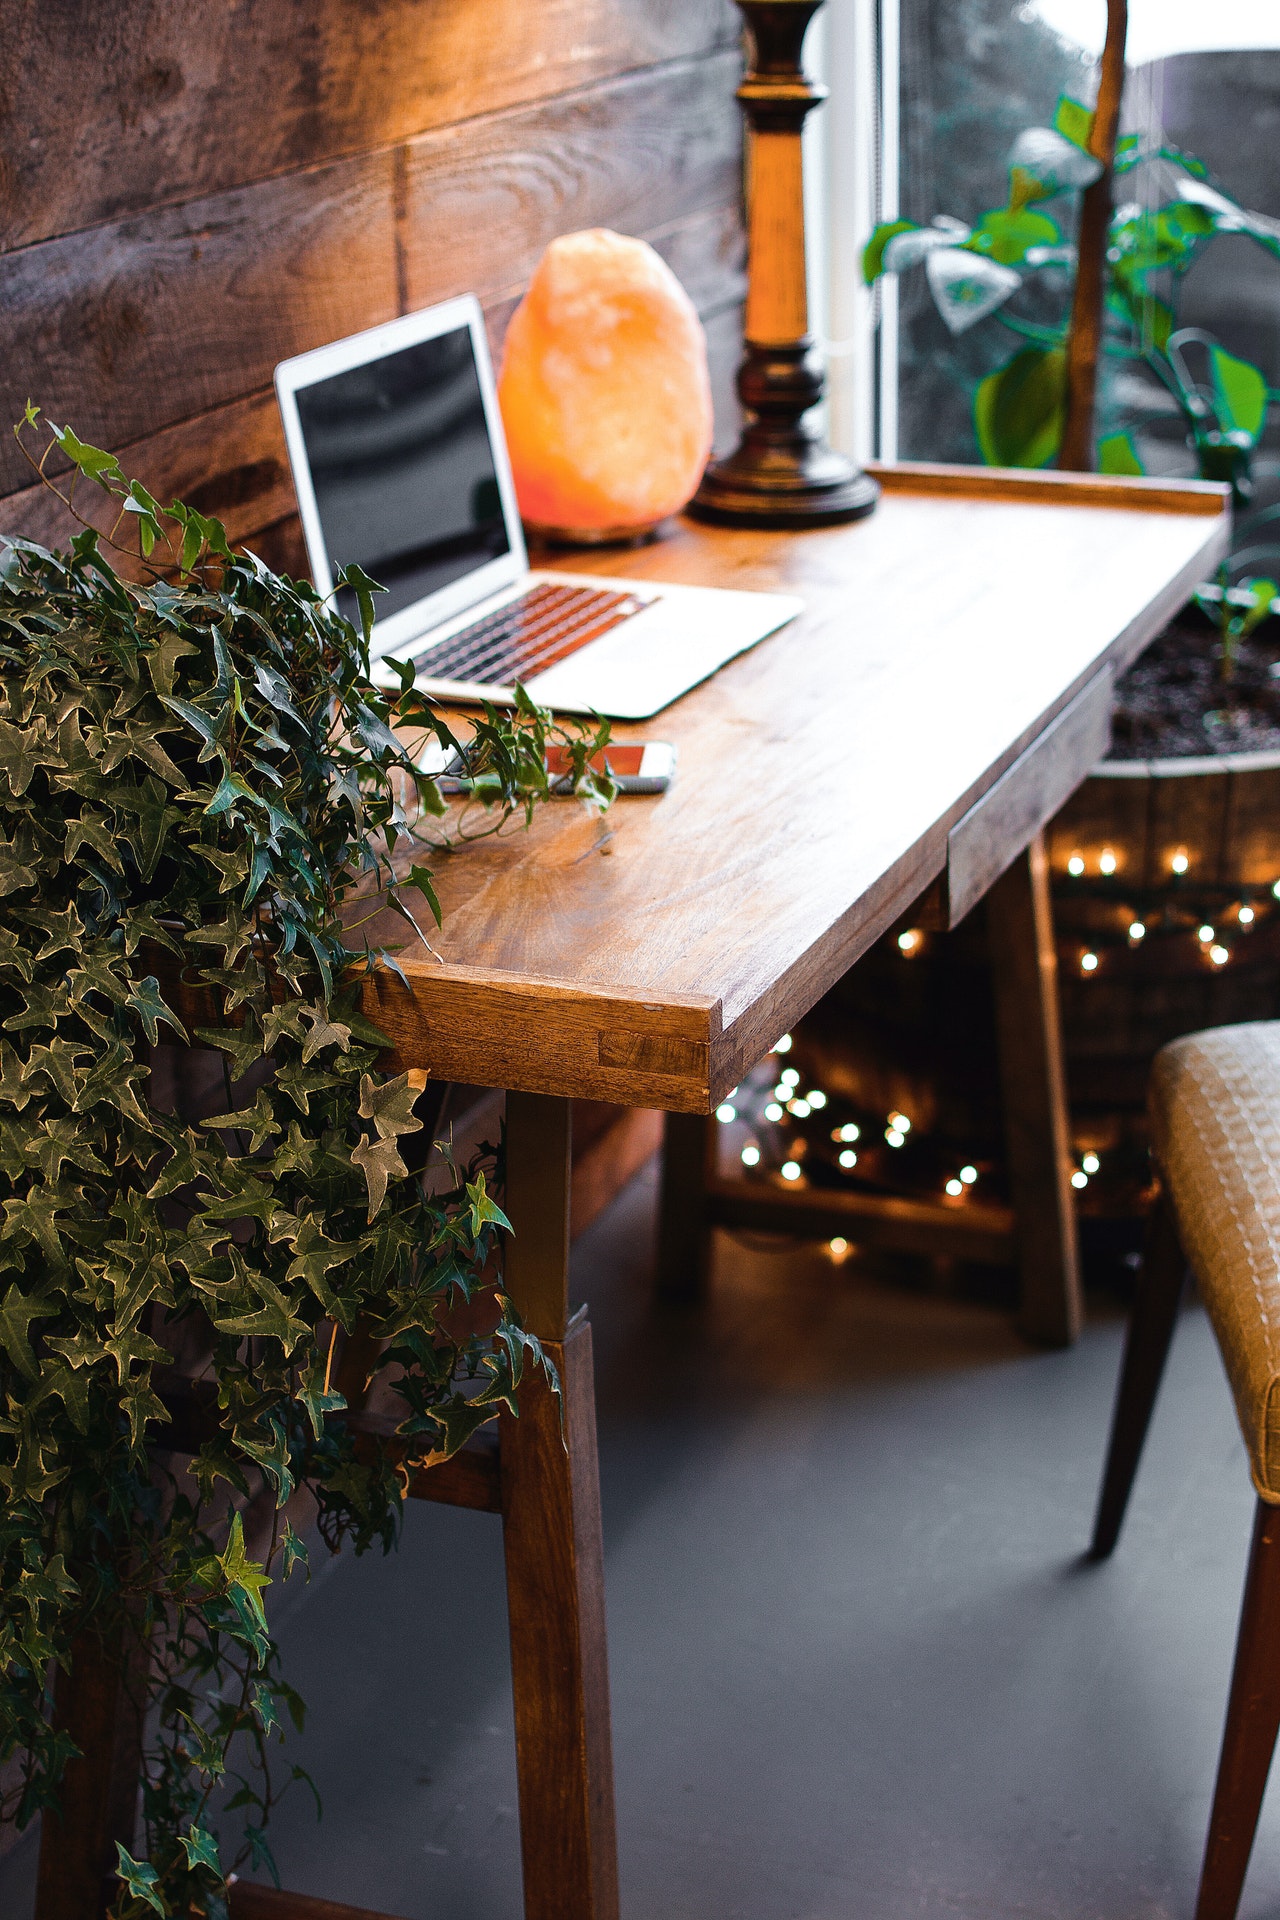 Home office with laptop and plants